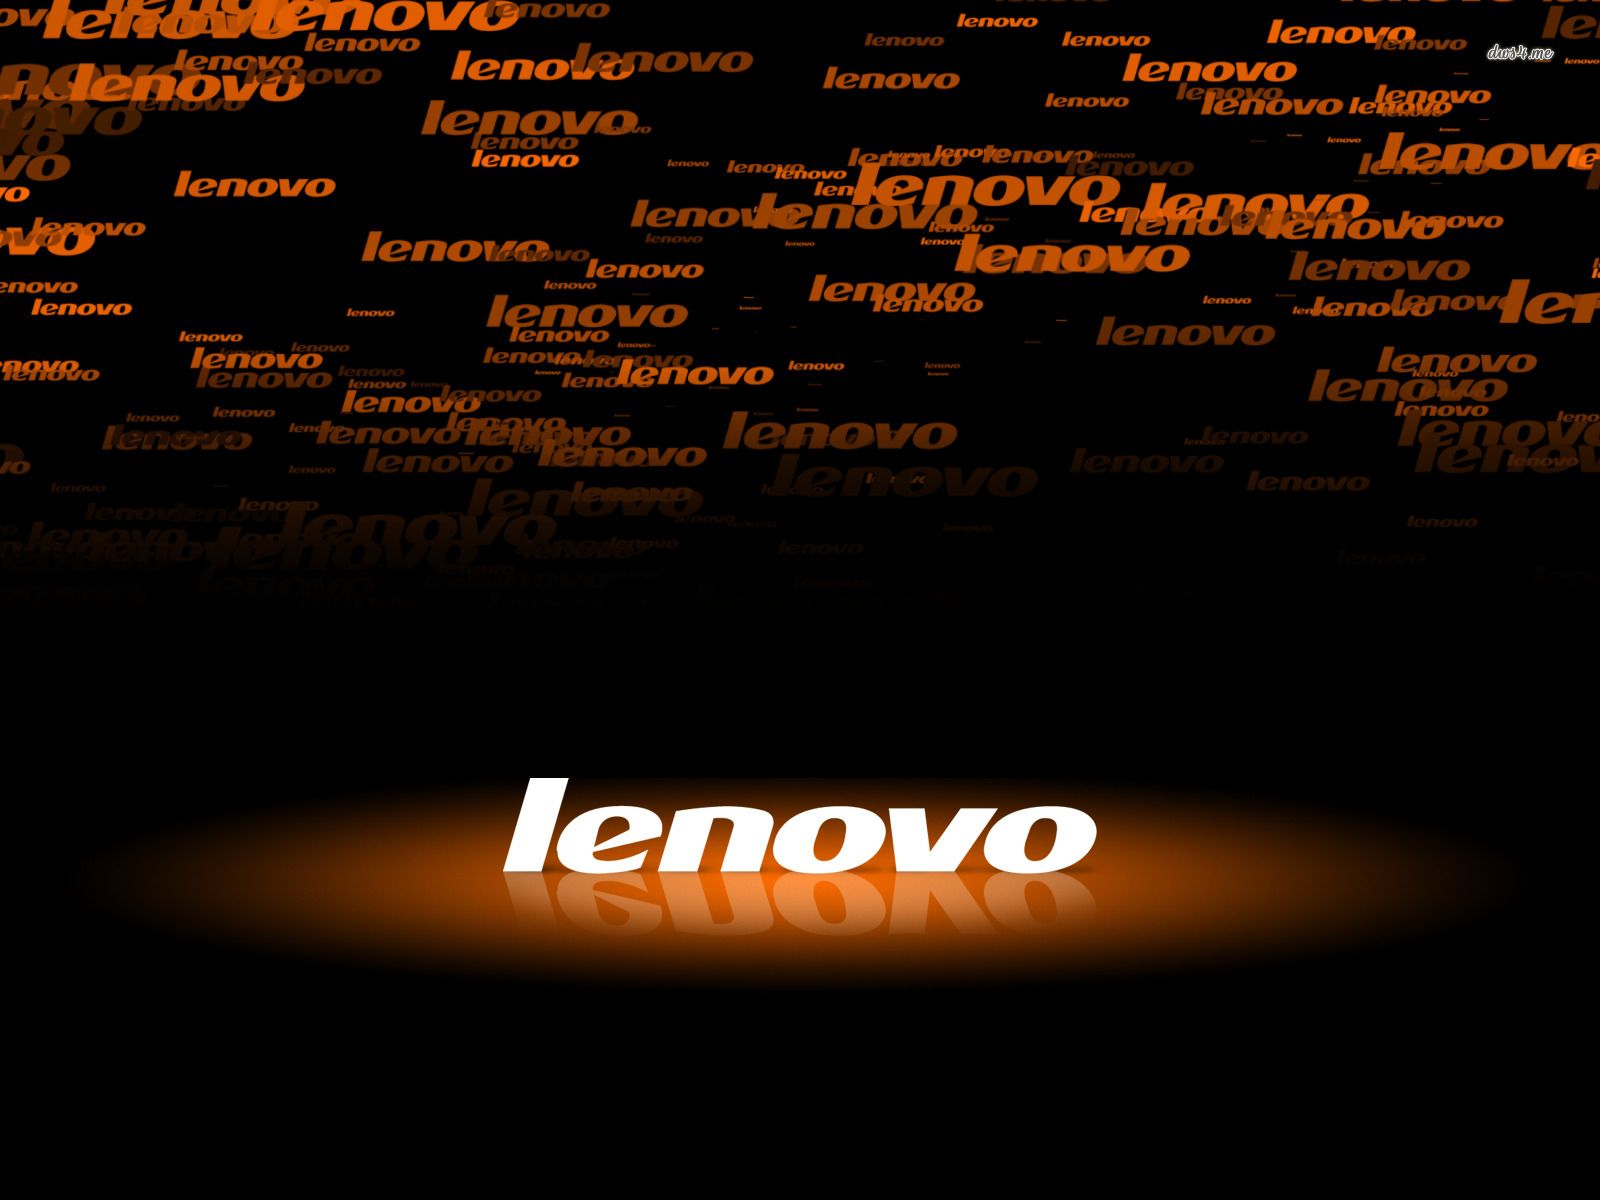 HD Lenovo Wallpaper - New Post has been published on windows